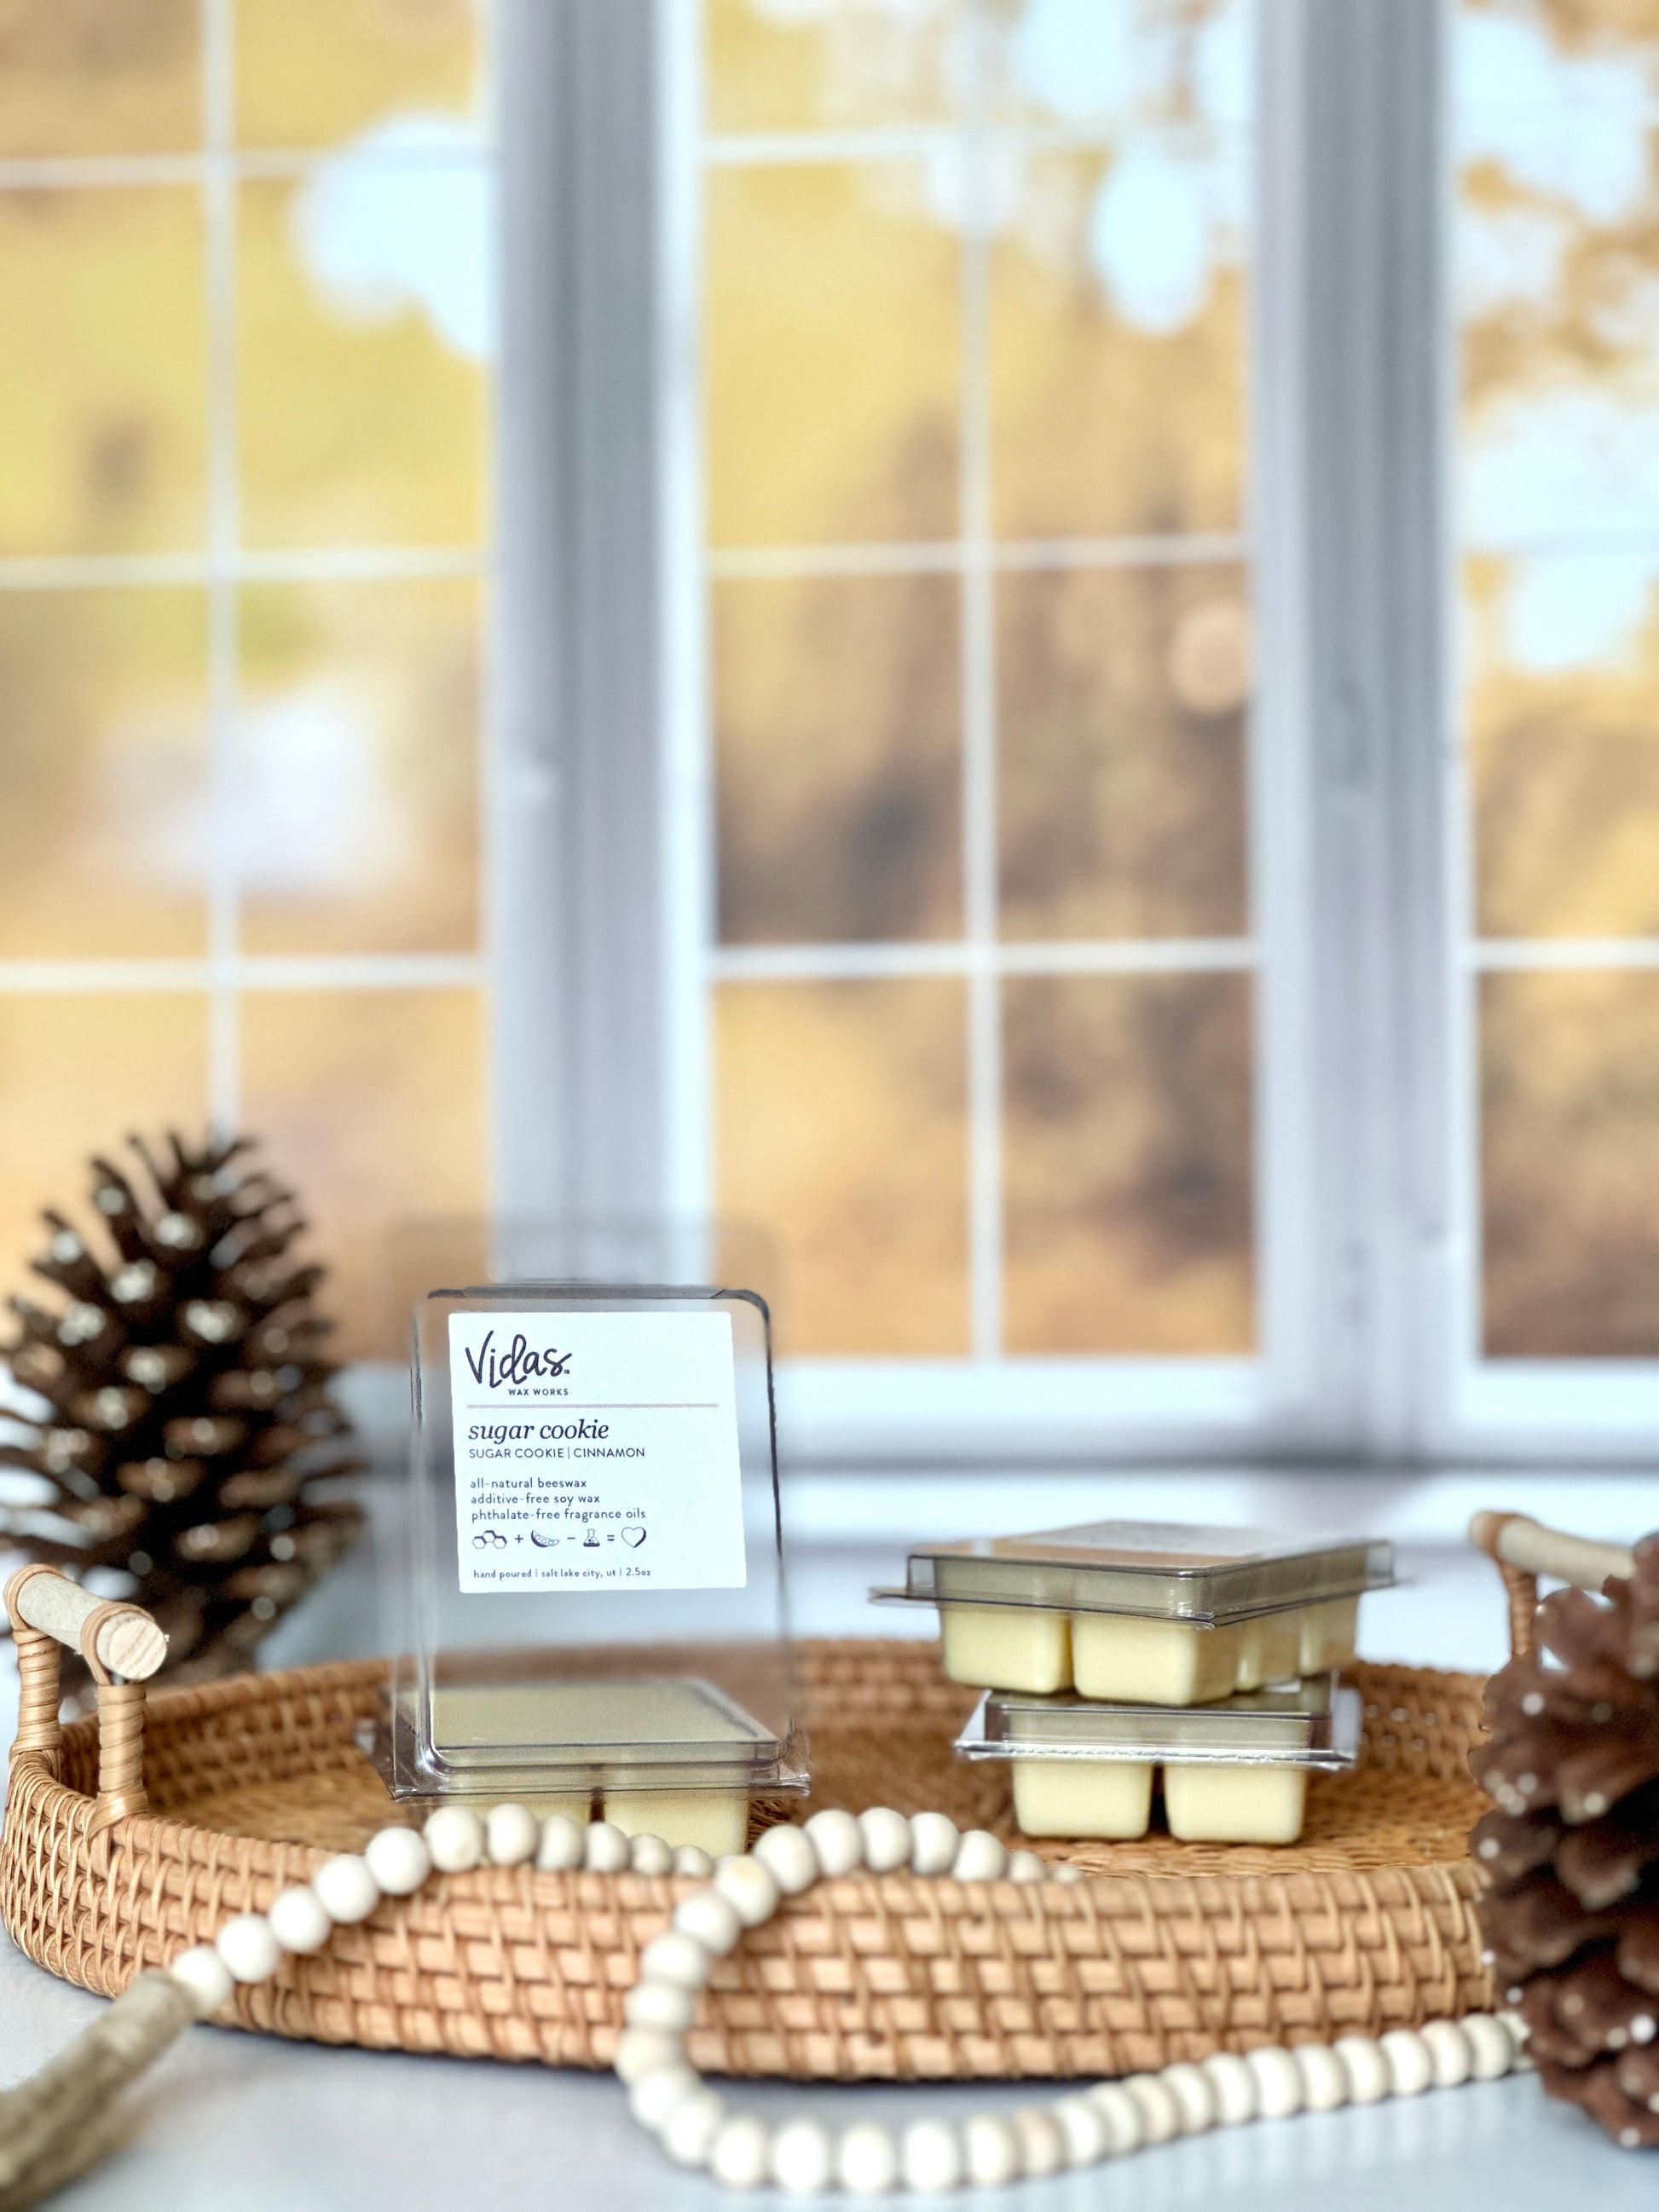 Experience the essence of fall: Sugar cookie and cinnamon fragrance. An open 2.5oz clamshell of wax melts rests alongside two stacked packages on a wicker serving tray. A pinecone graces the foreground, adorned with a string of beads, while a larger pinecone punctuates the scene against the backdrop of blurred yellow fall leaves outside a window.